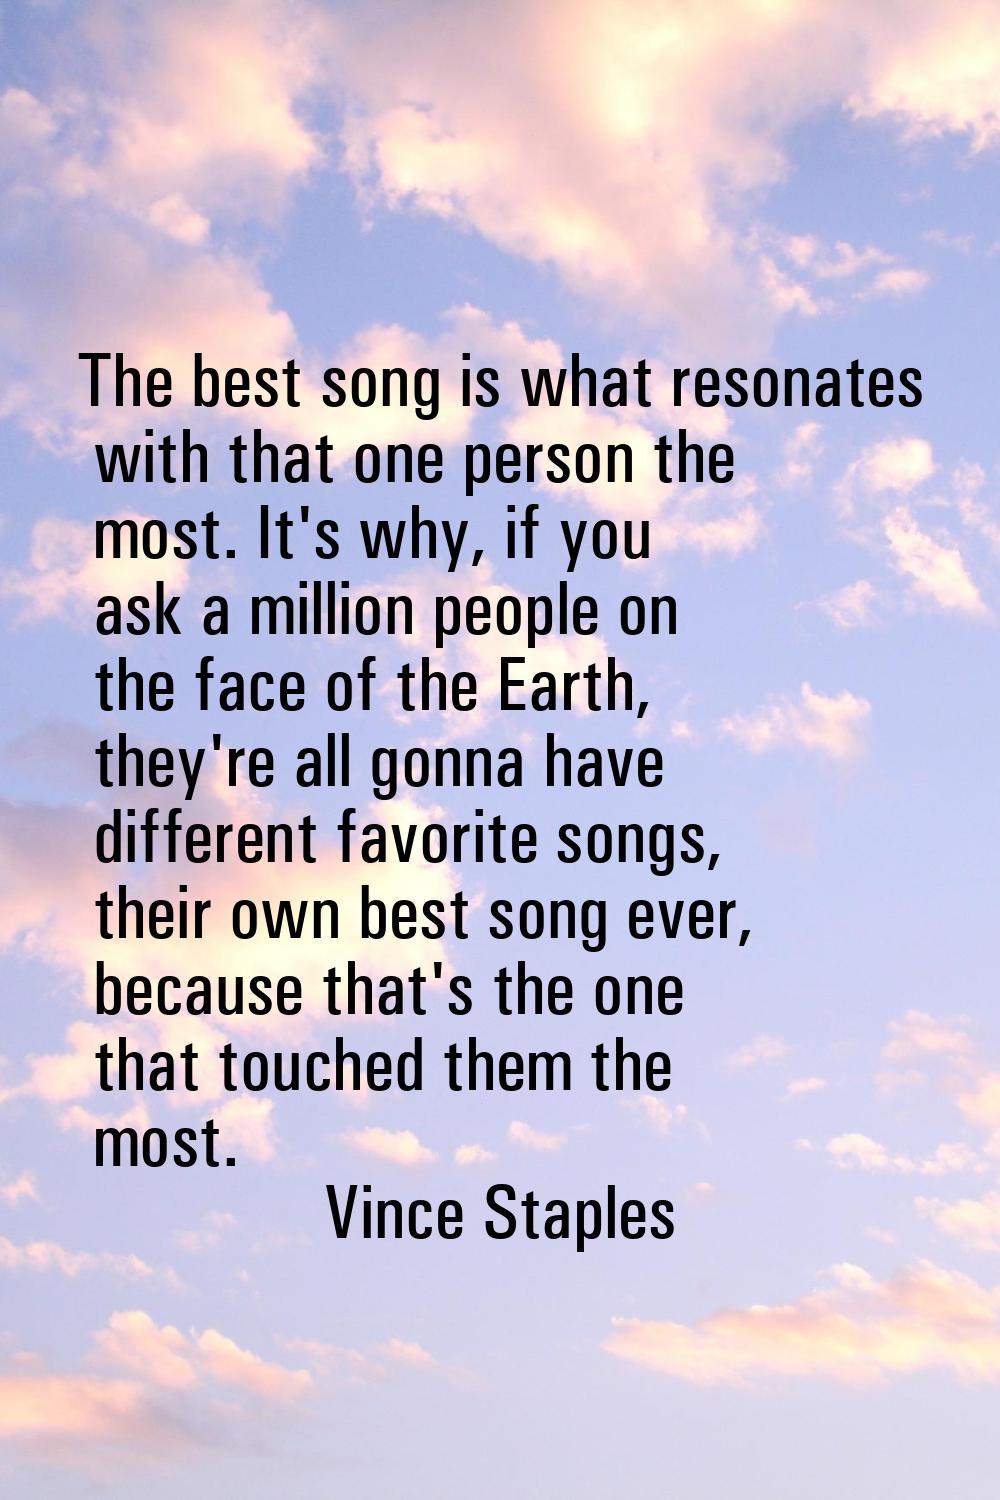 The best song is what resonates with that one person the most. It's why, if you ask a million peopl